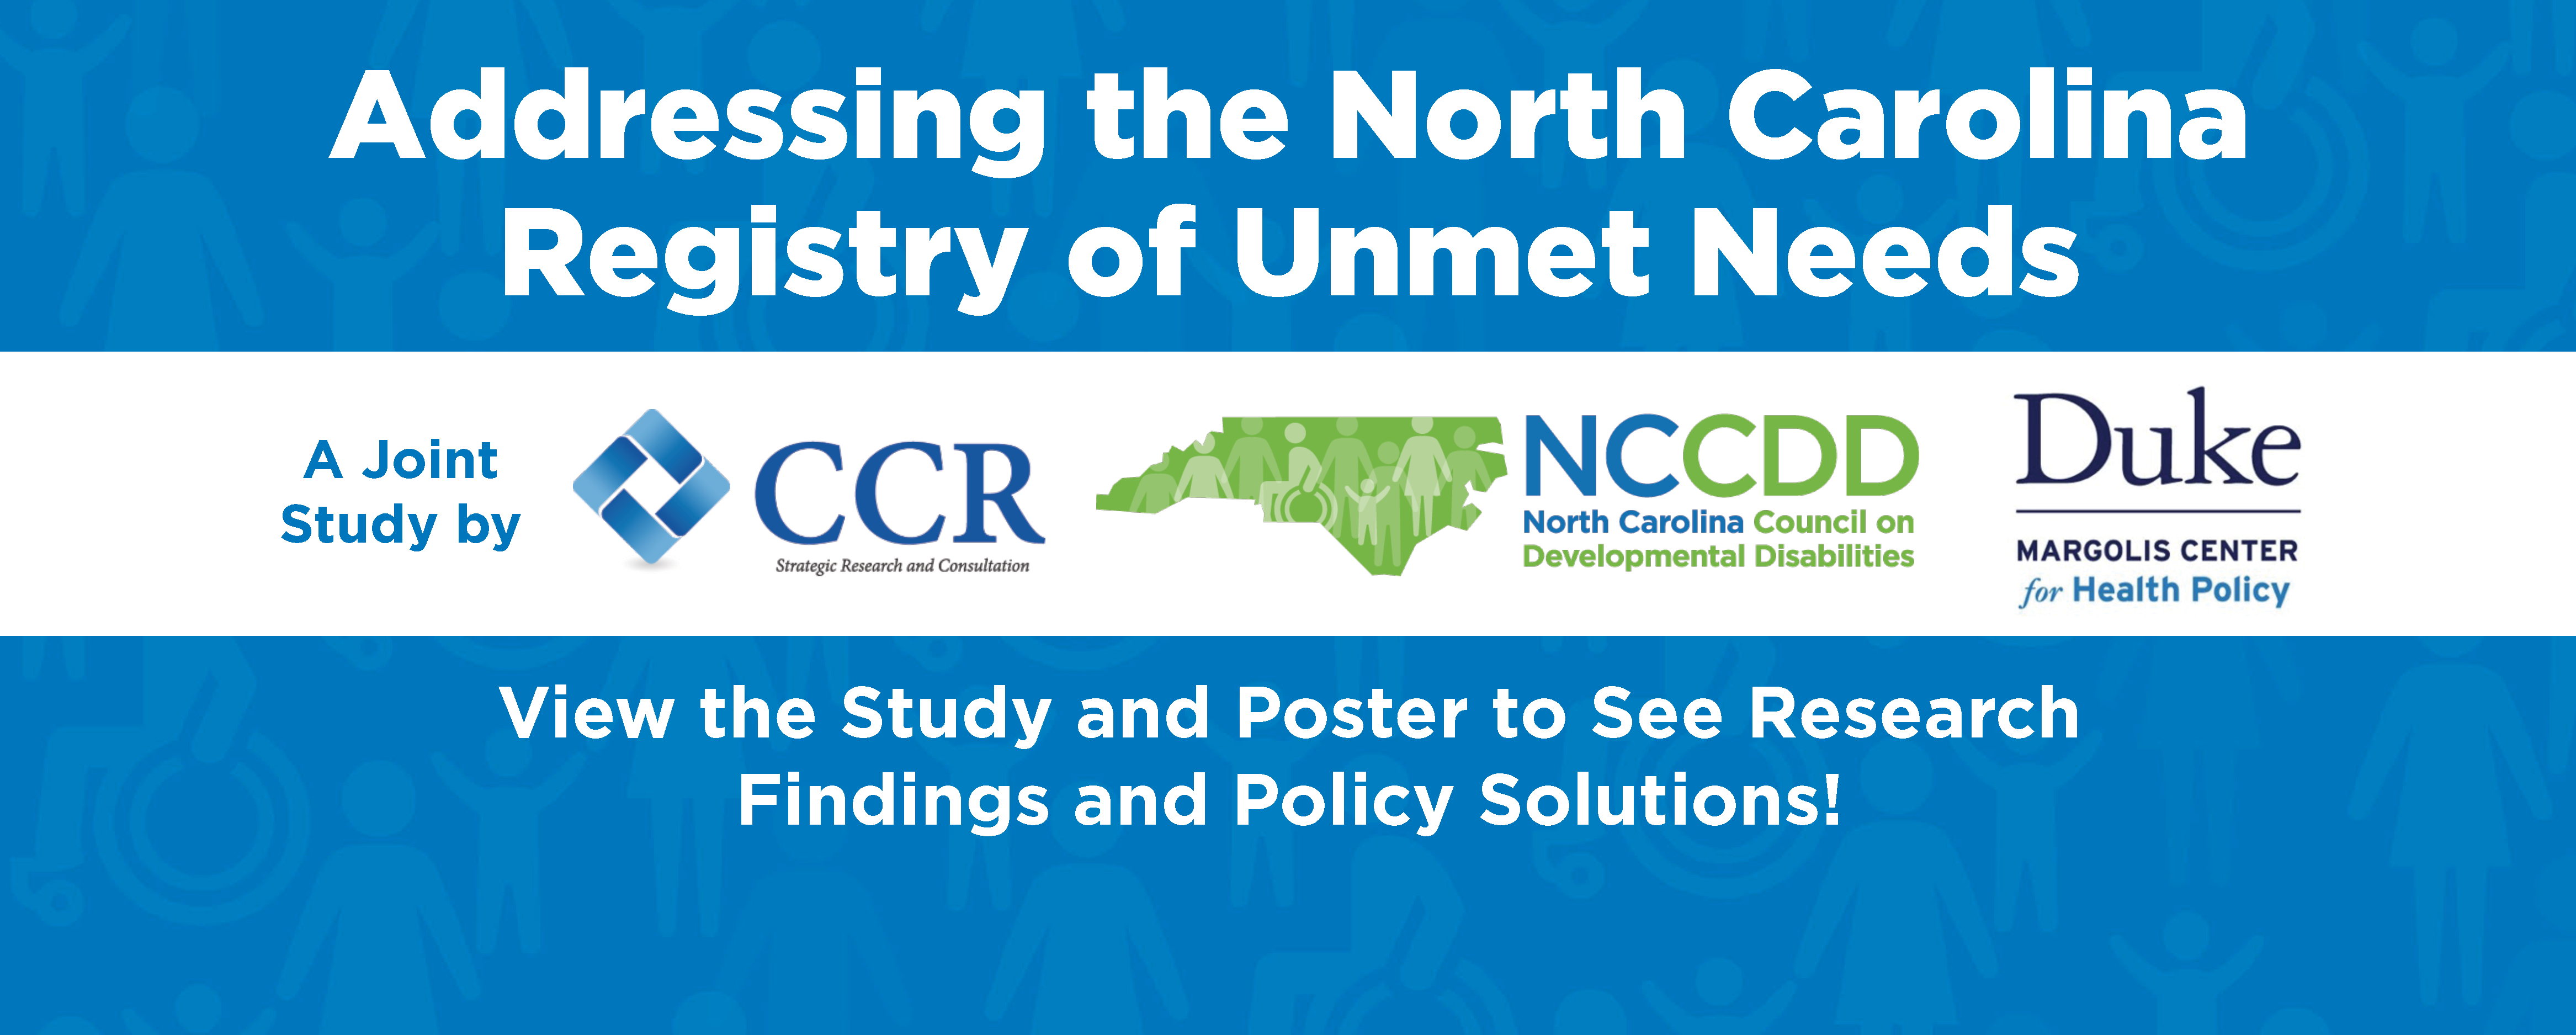 Addressing the North Carolina Registry of Unmet Needs - View the Study and Poster to See Research Findings and Policy Solutions!